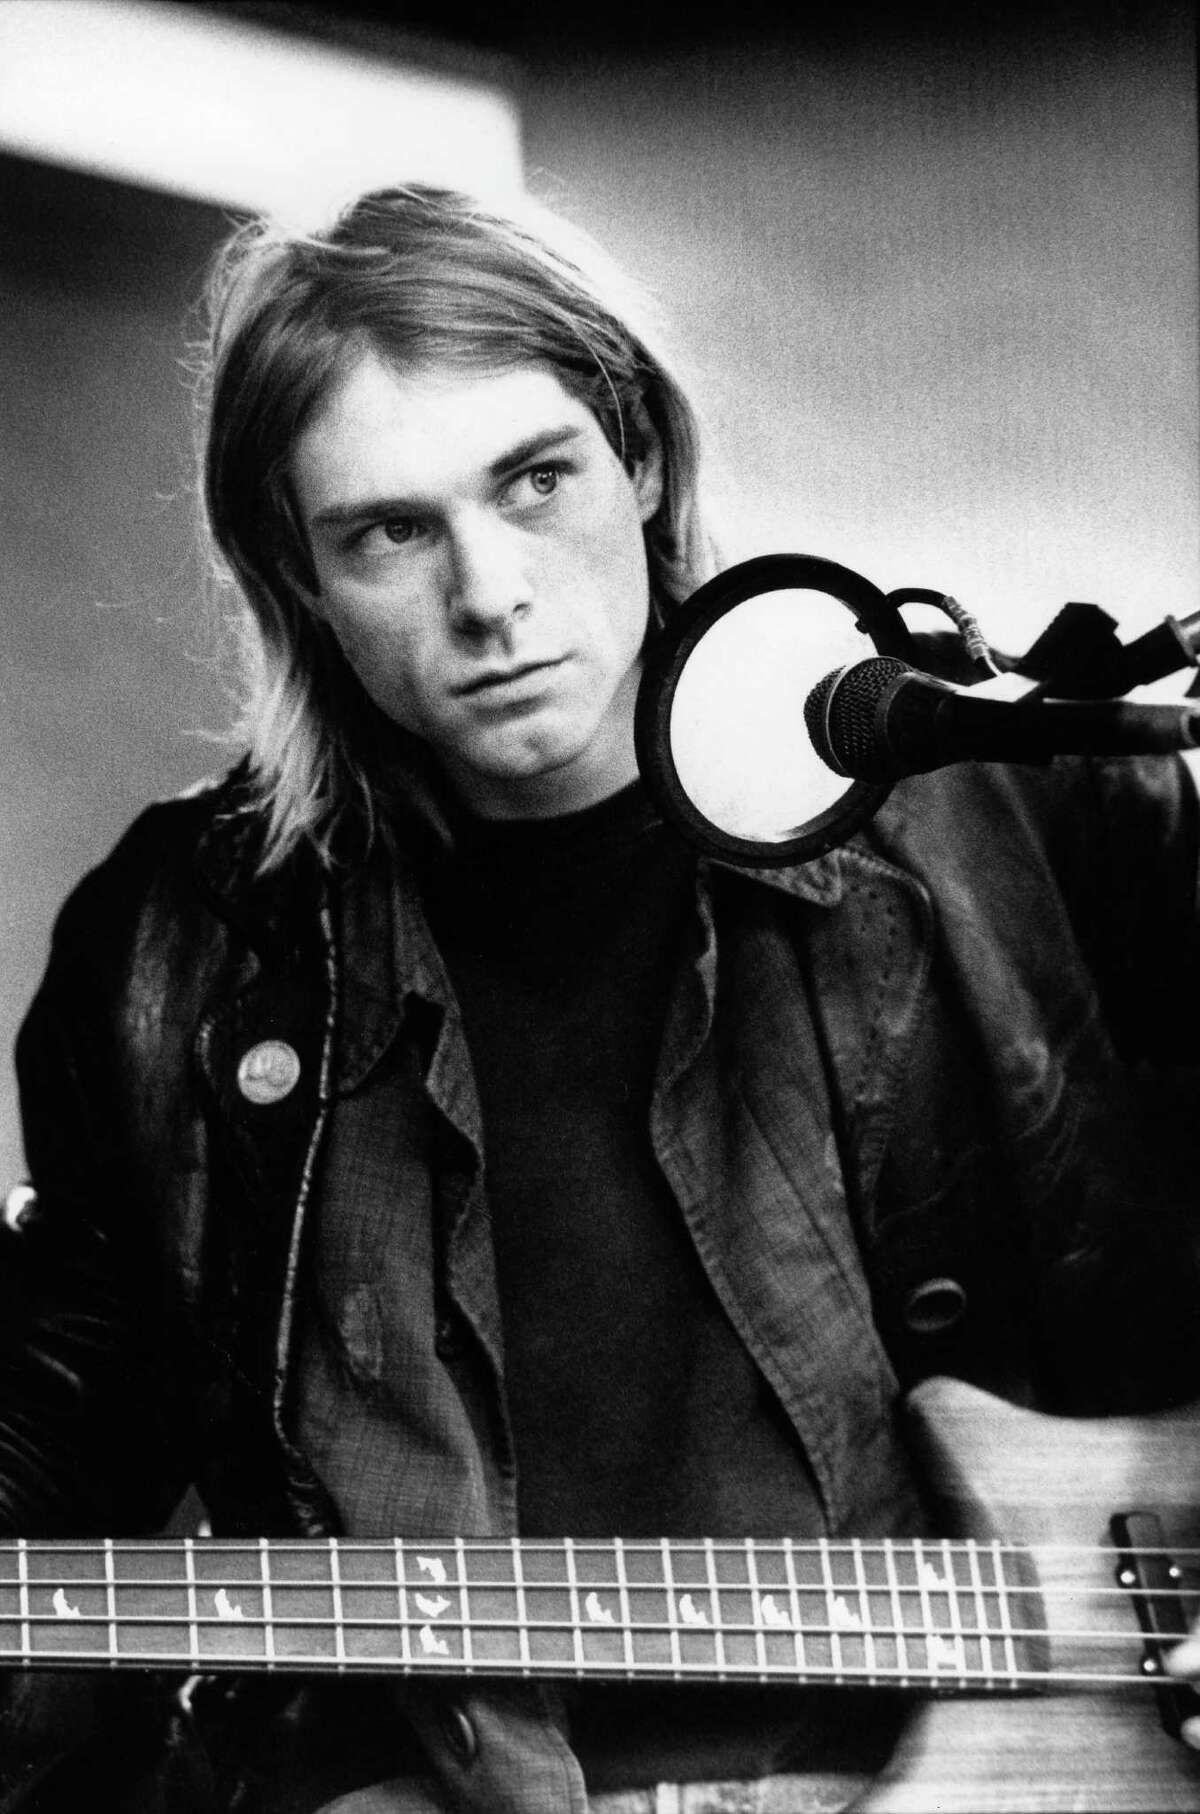 Kurt Cobain took his own life on April 5, 1994. Twenty-five years later, DJ Marco Collins, then a friend of Cobain's, looks back on the days following Cobain's death.